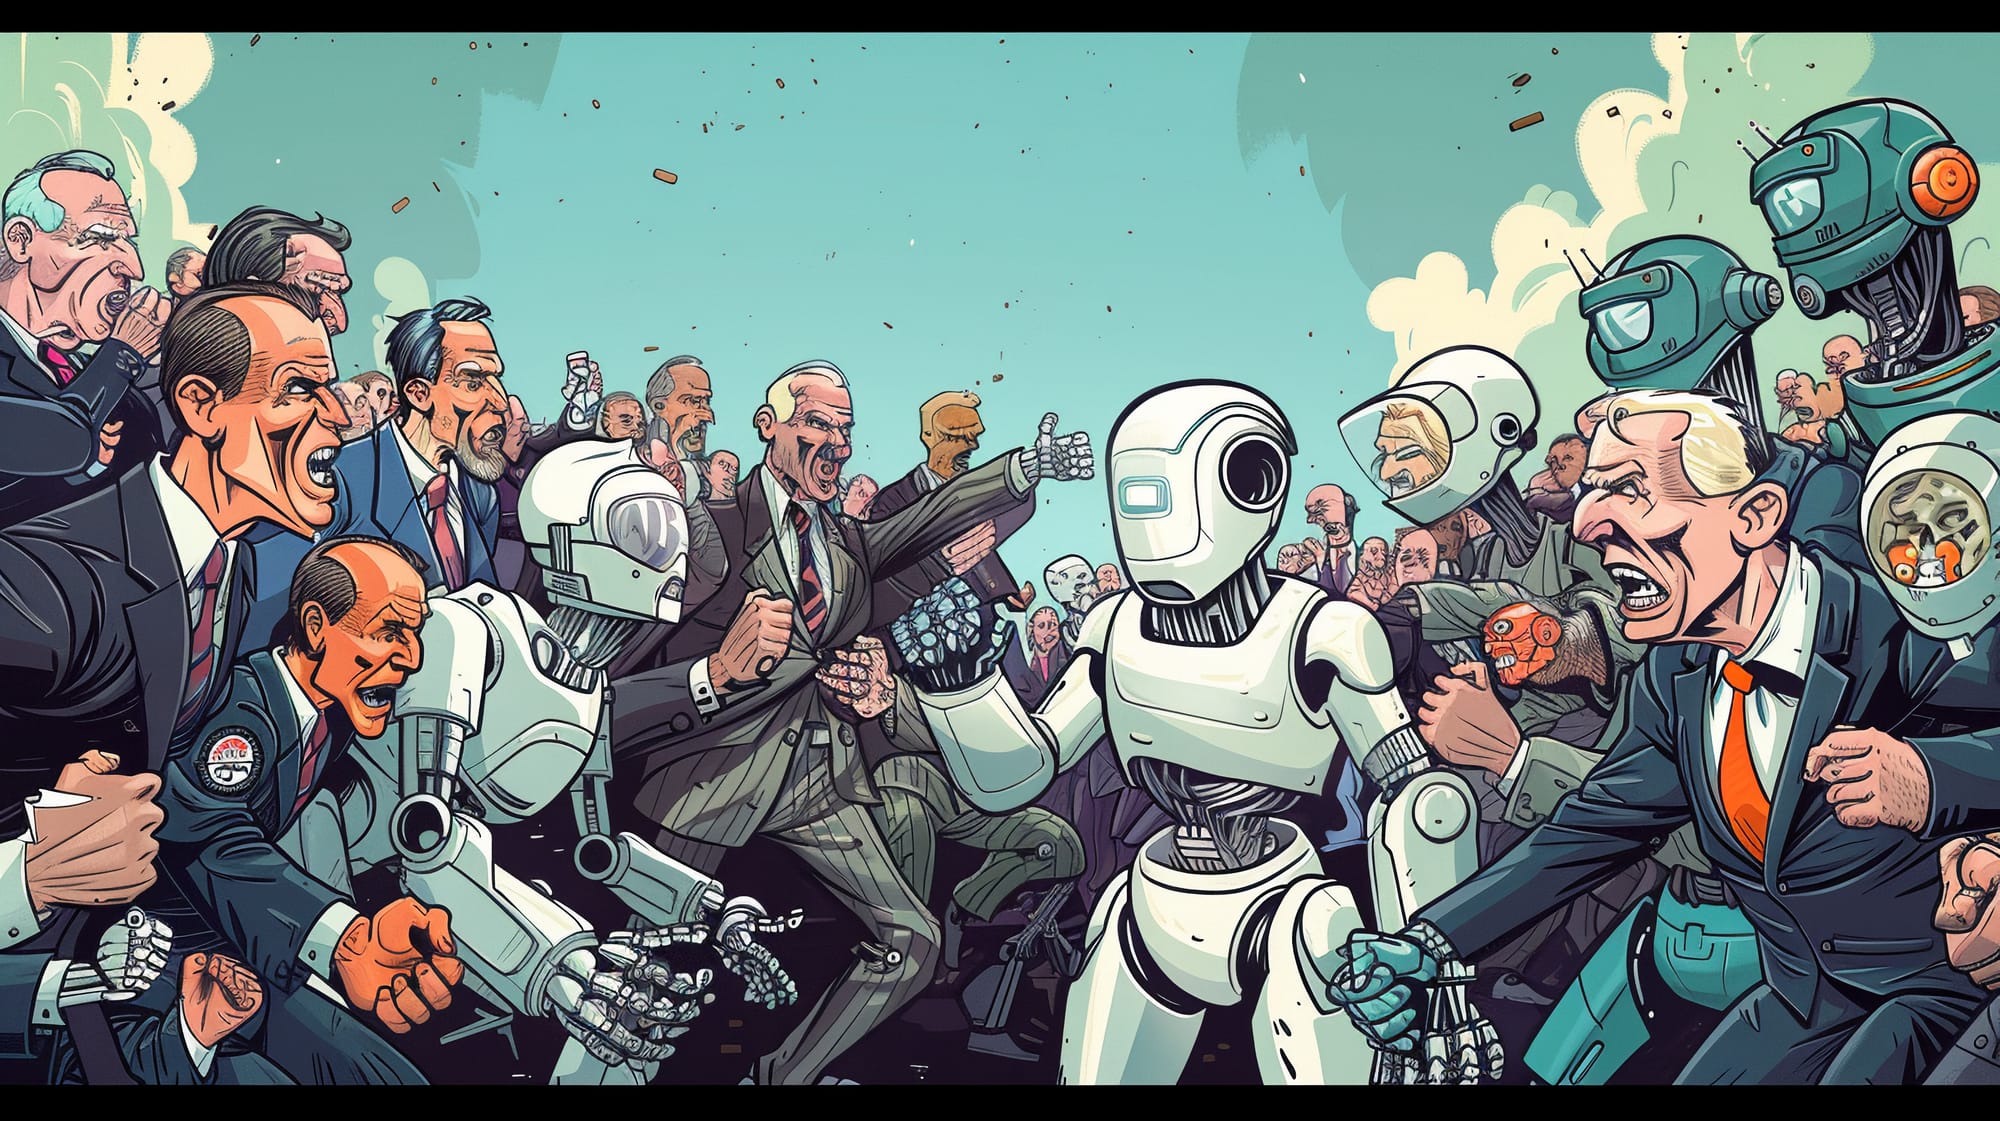 Aging politicians and robots fighting.